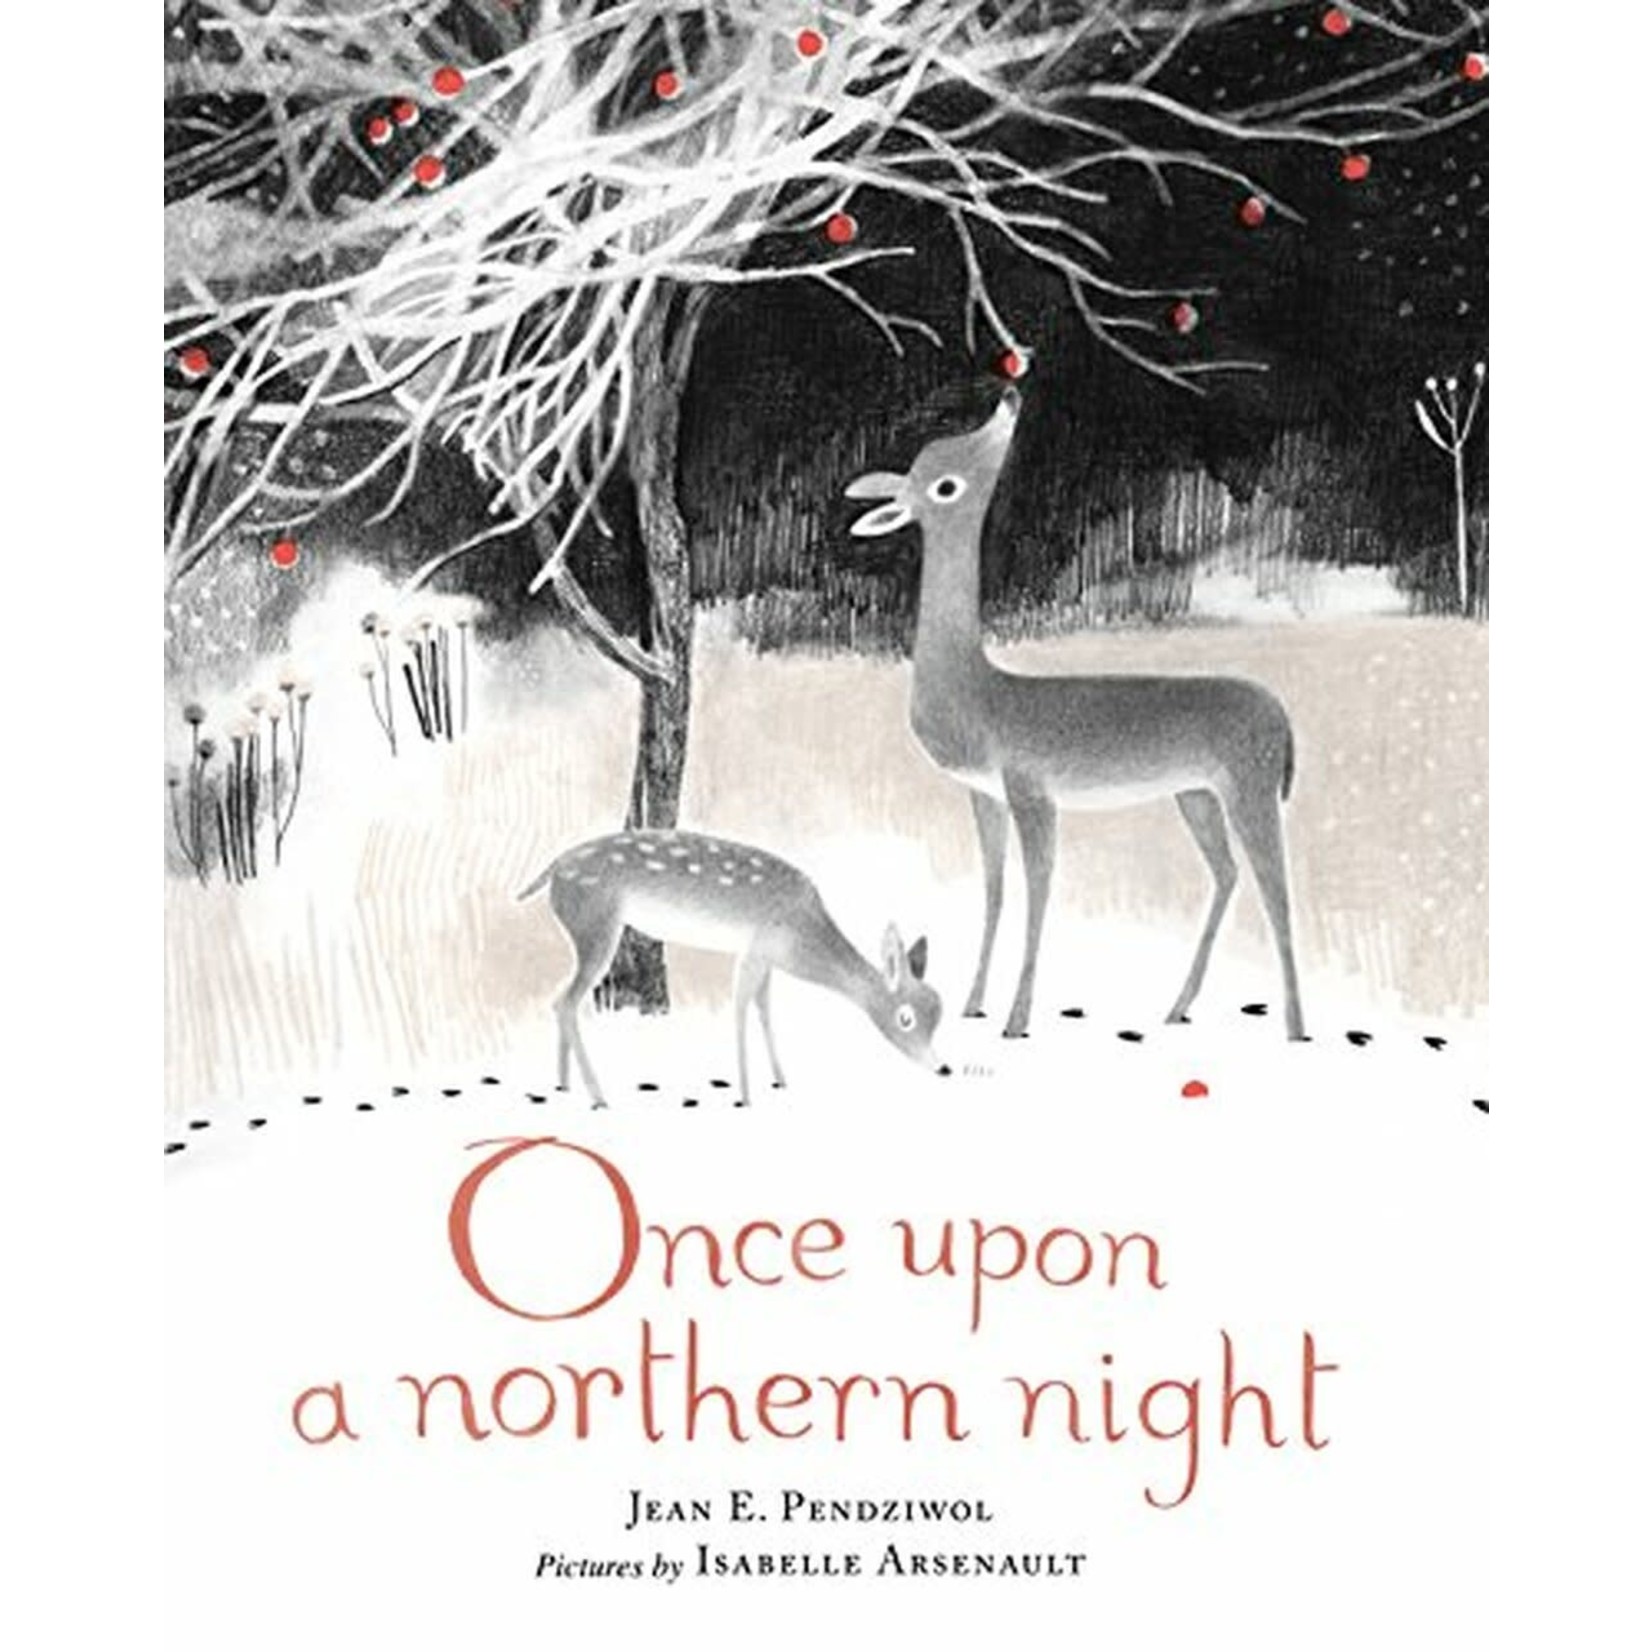 Once Upon a Northern Night by Jean E. Pendziwol (Hardcover)